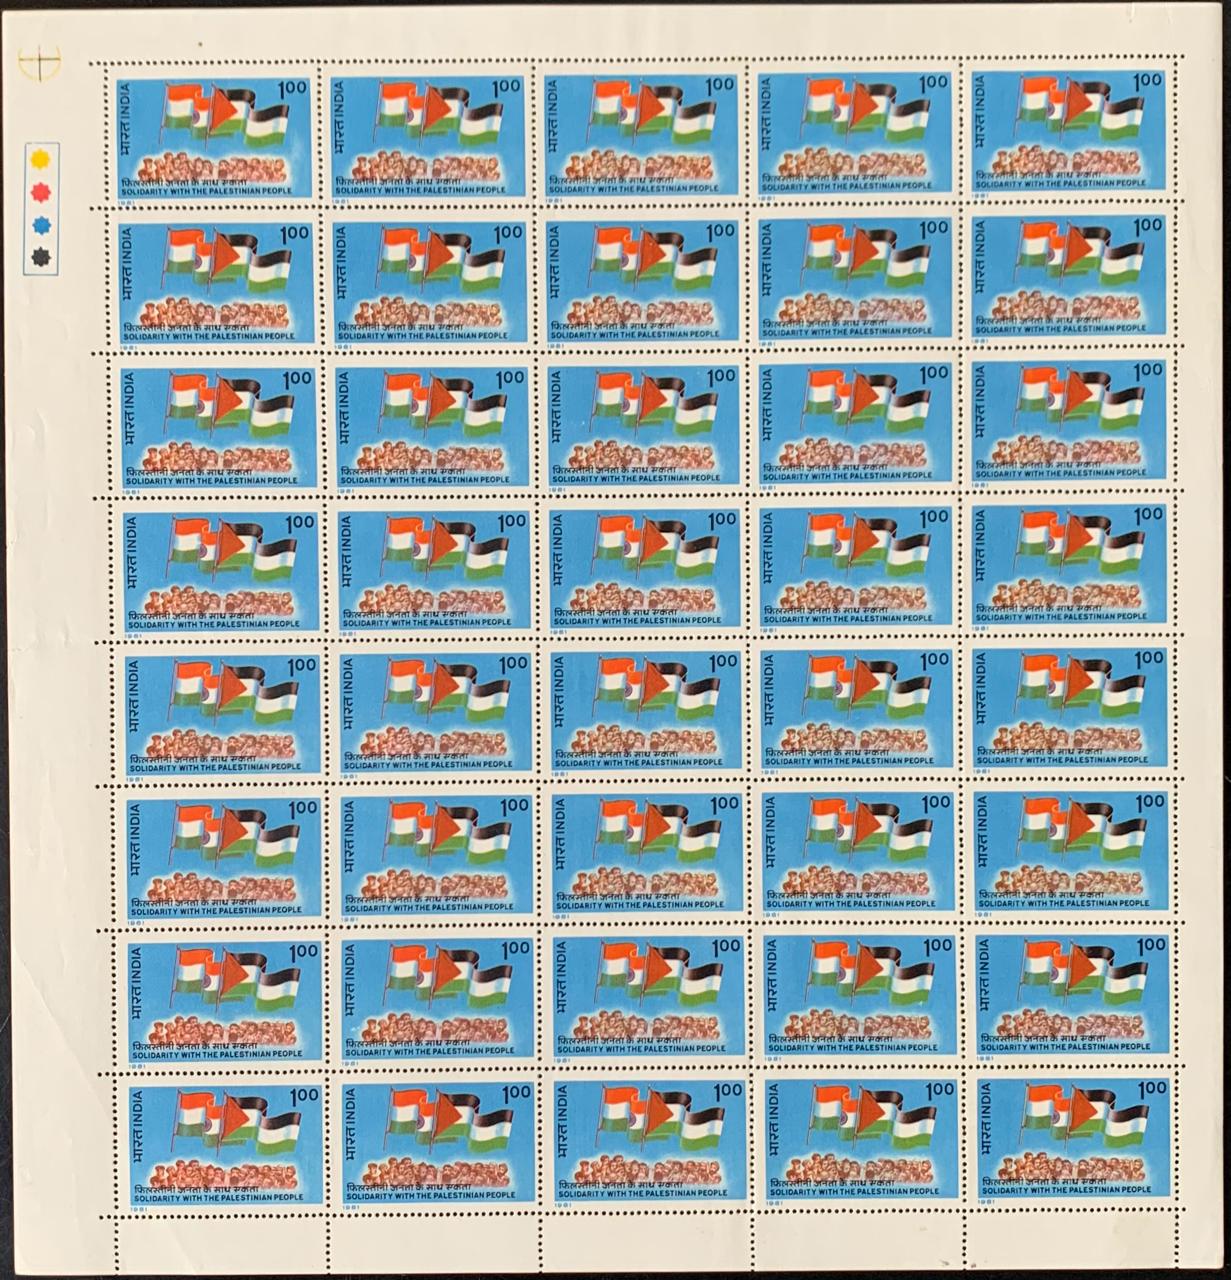 India 1981 Palestinian Solidiarity (P.L.O. Flags) Full Sheets